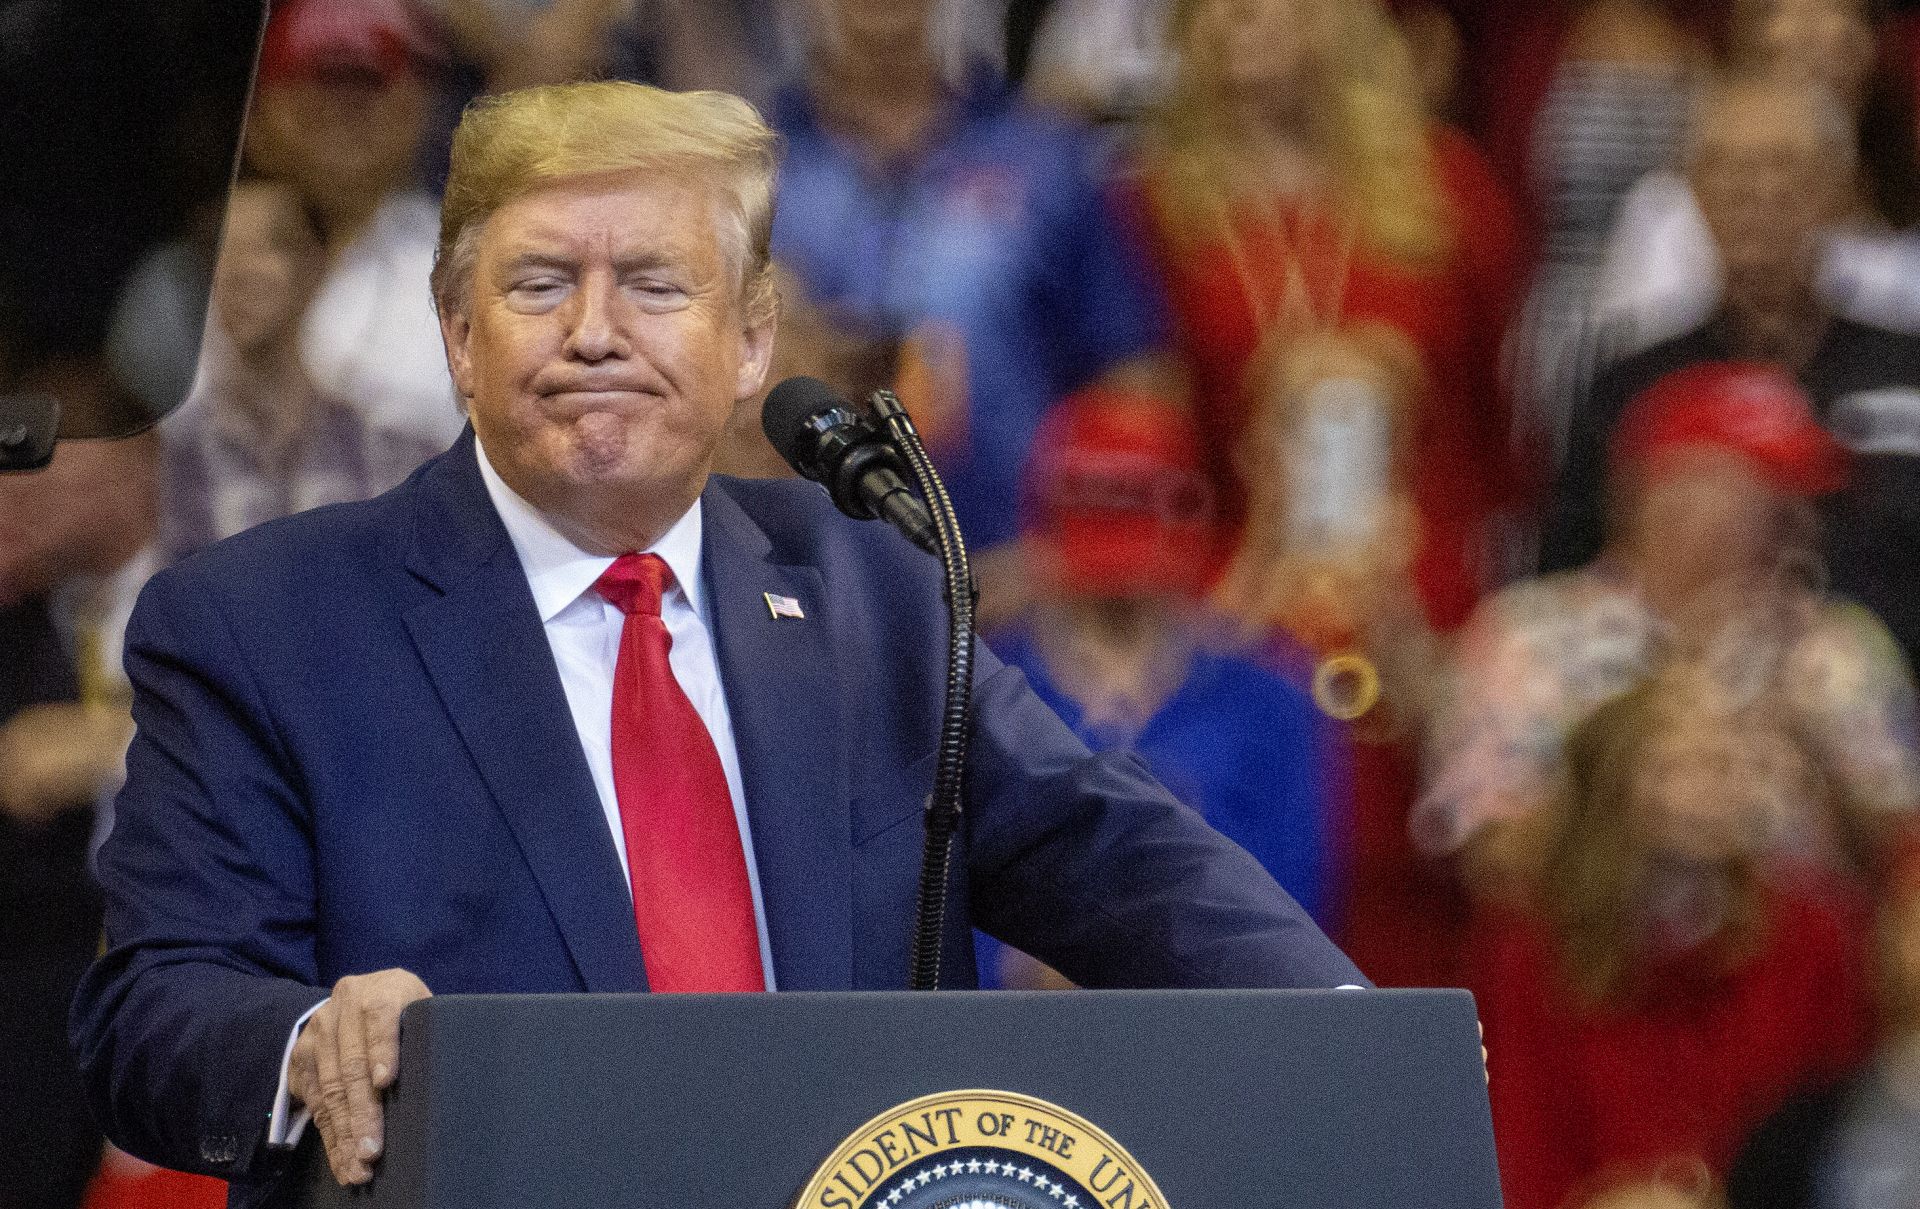 epa08028074 US President Donald J. Trump reacts during a campaign rally at the BB&T Center in Sunrise, Florida, USA, 26 November 2019.  EPA/CRISTOBAL HERRERA